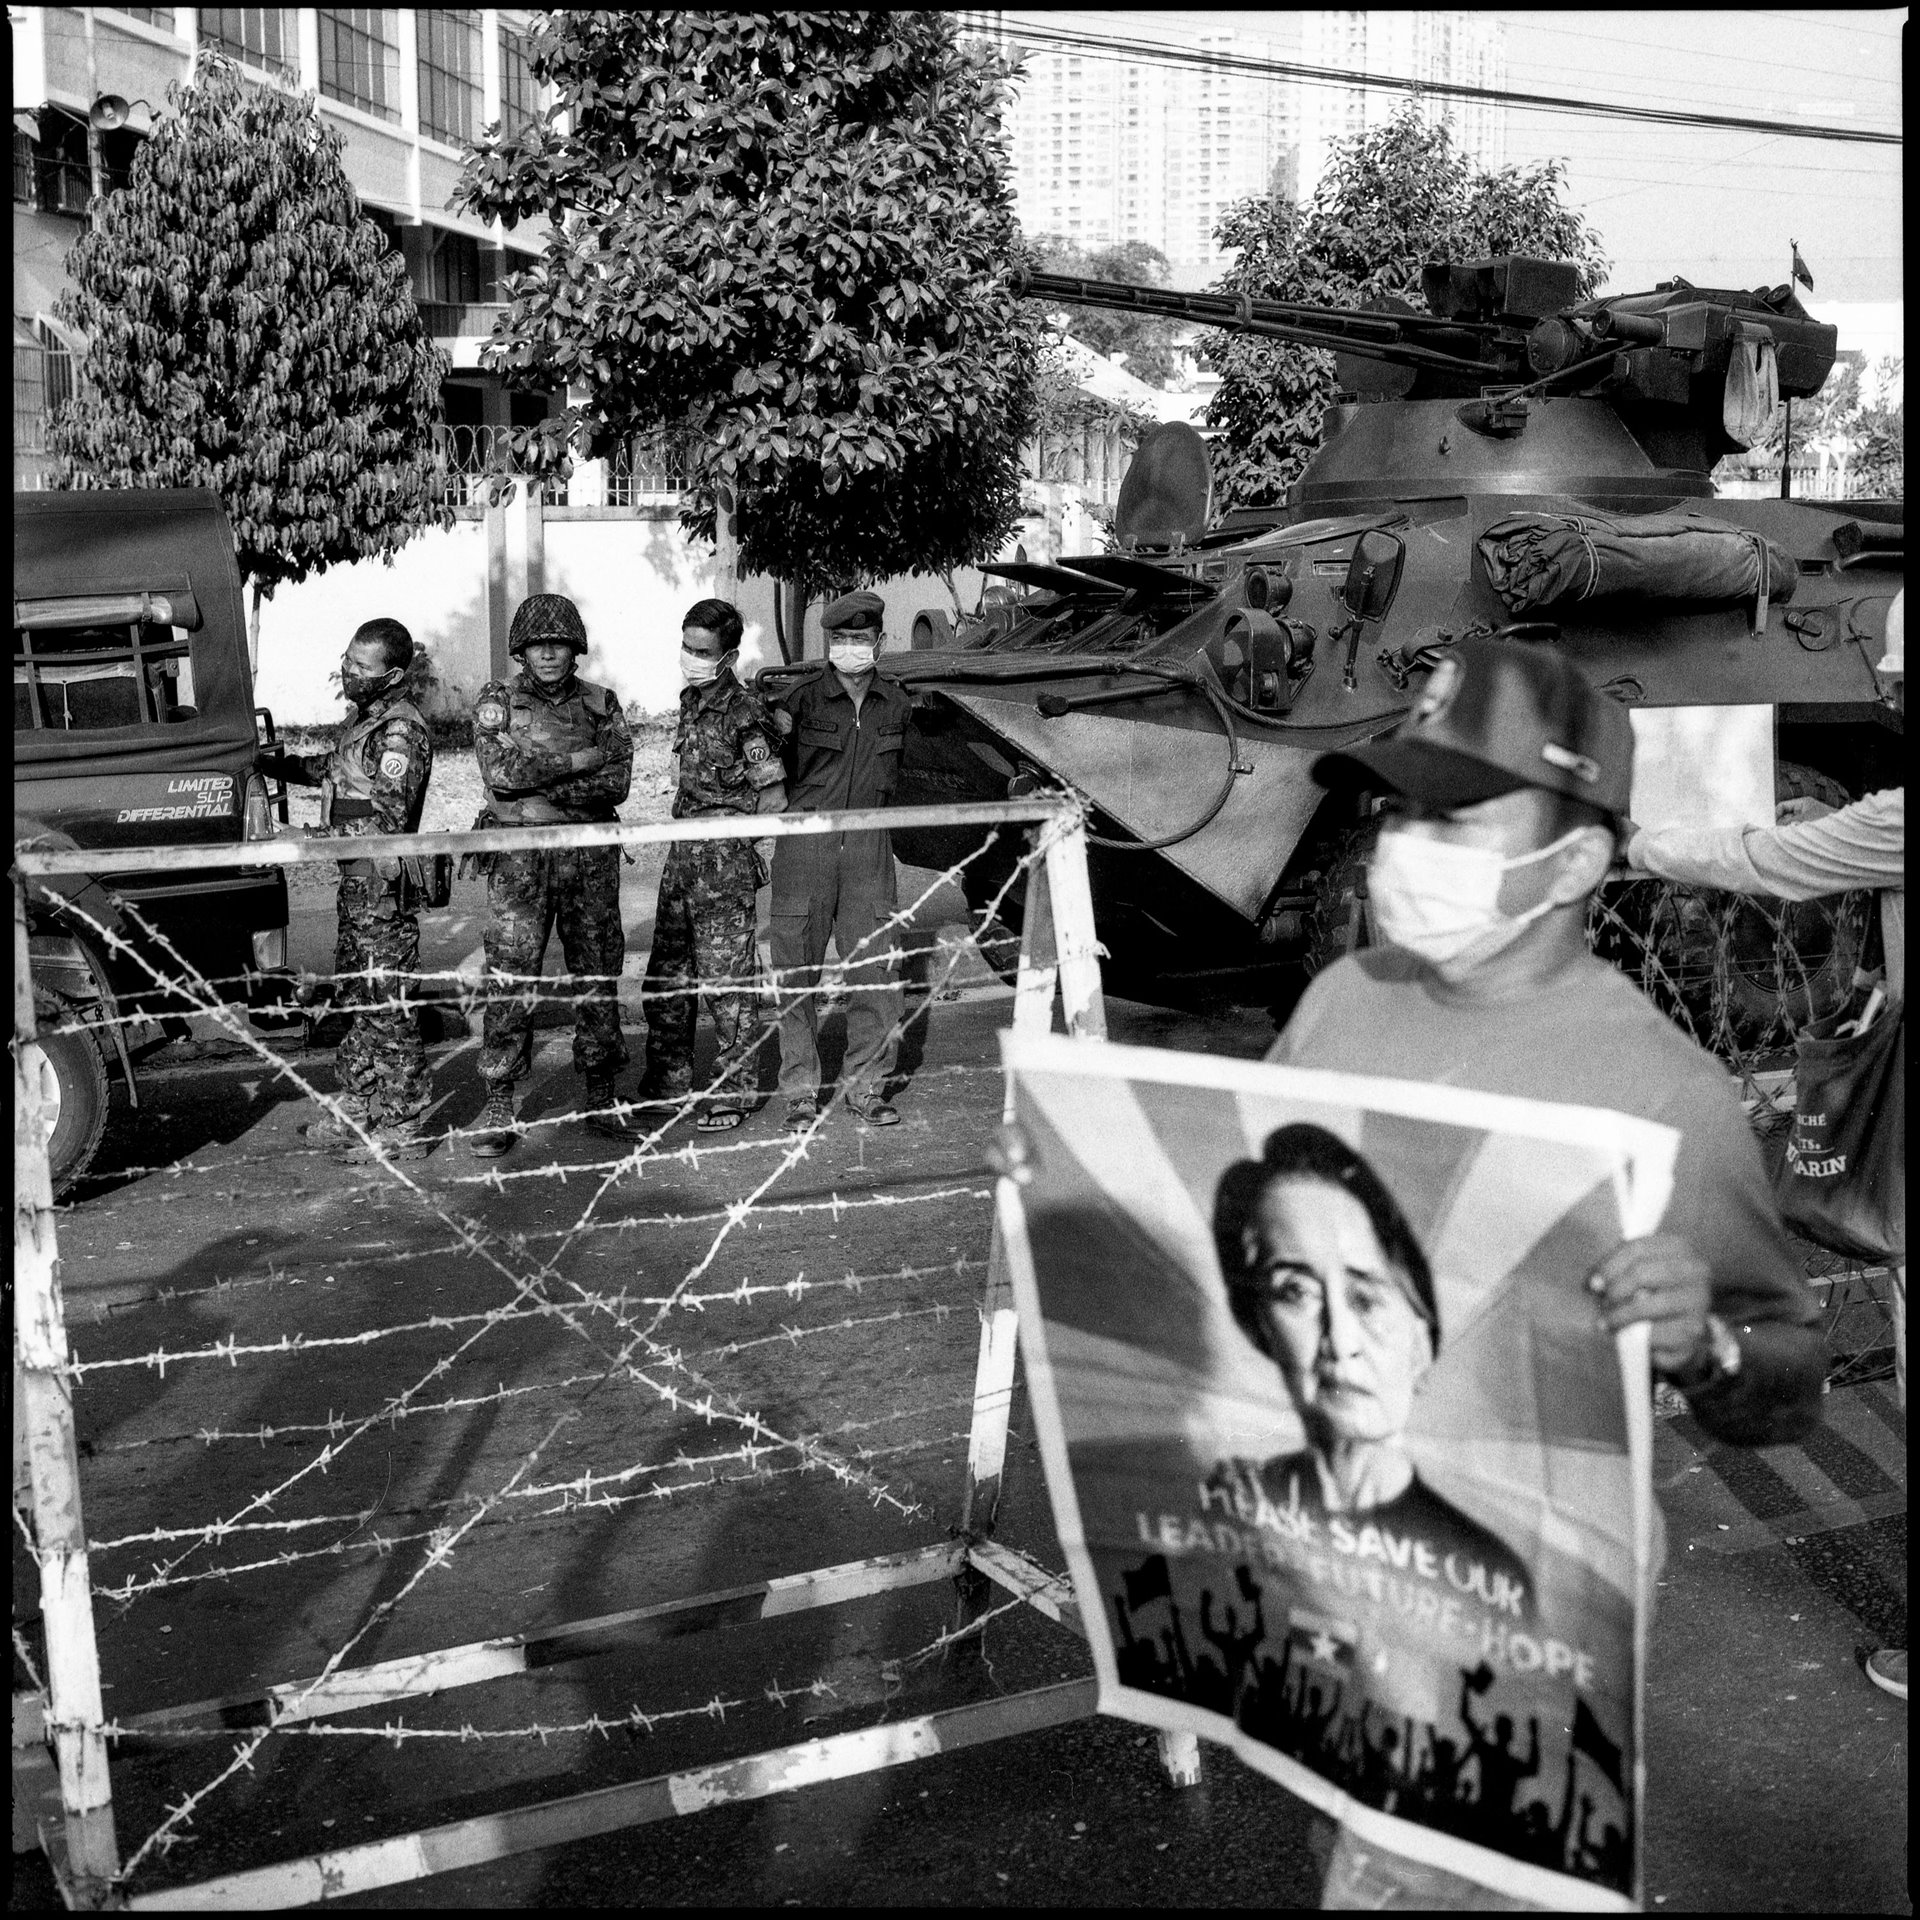 Protesters in front of the Central Bank of Myanmar in Yangon demand the release of political prisoners, including democratic leader Aung San Suu Kyi (pictured on the poster). Protestors also called for bank employees to join the civil disobedience movement. Many employees of private banks had already joined, causing branch operations to halt.